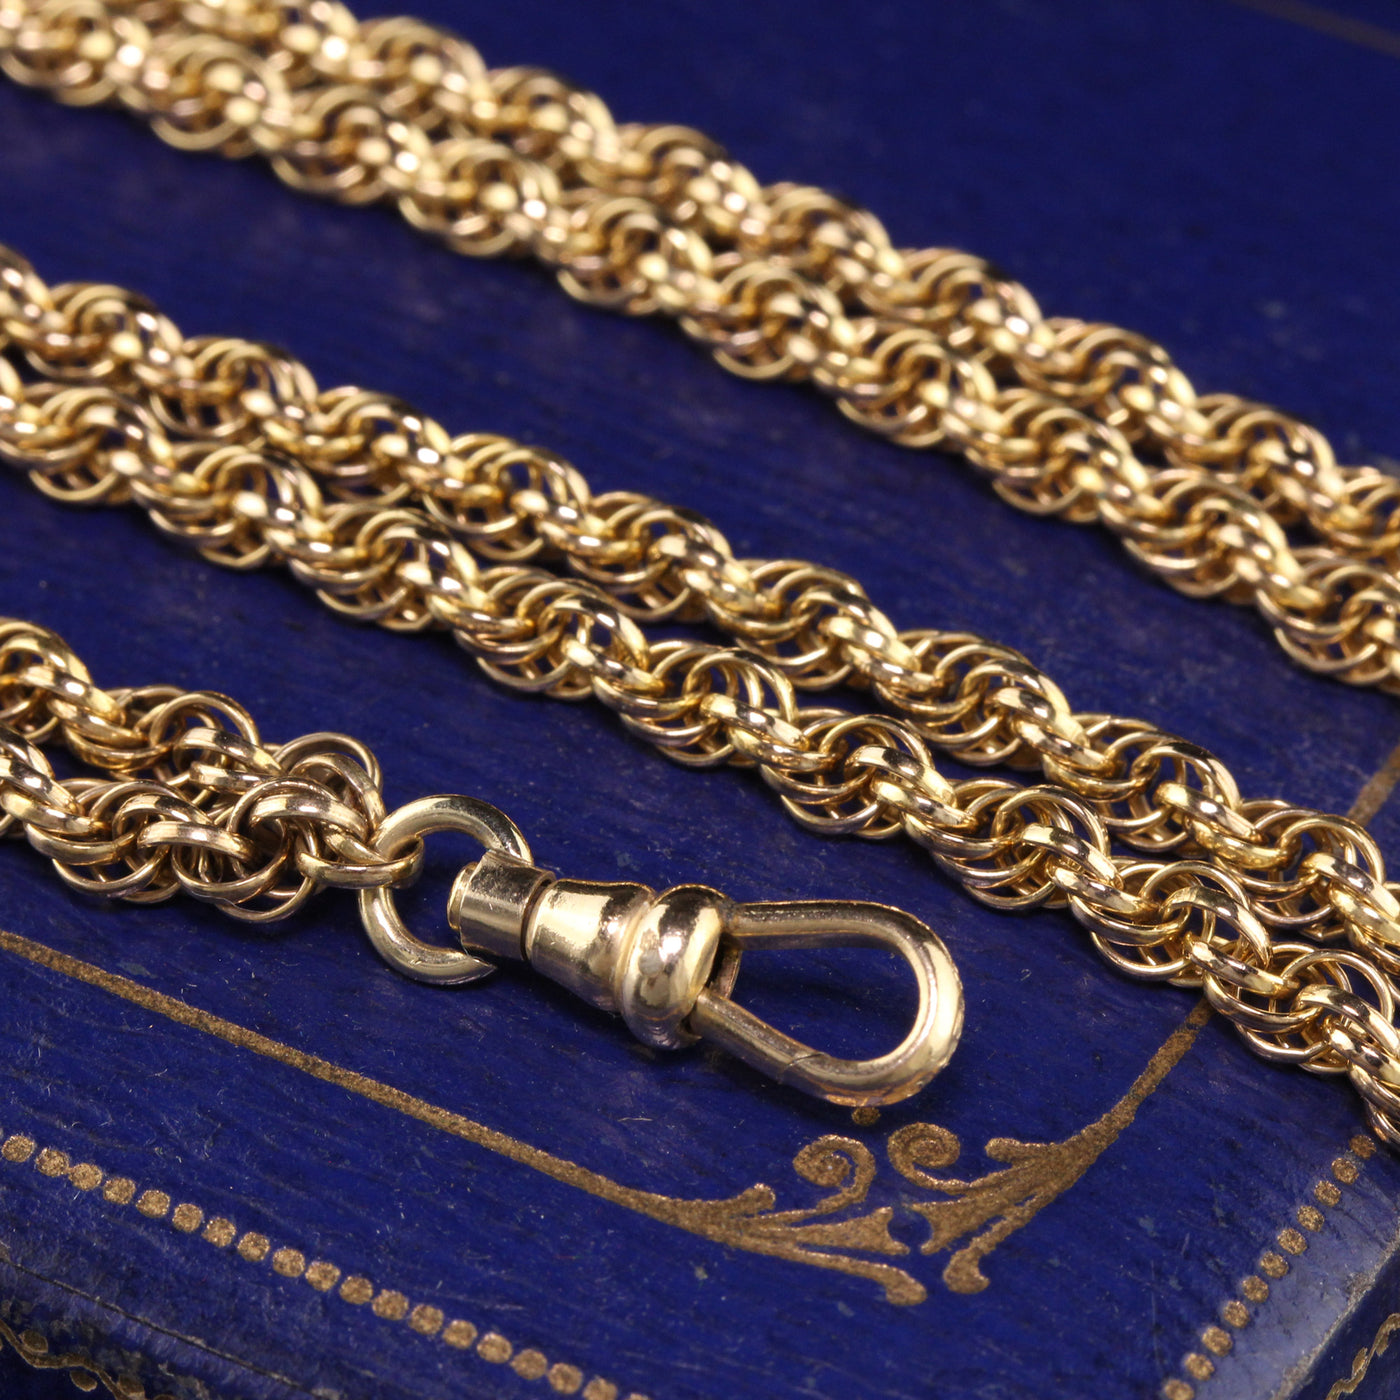 Antique Victorian 10K Yellow Gold Rope Link Chain Necklace - 27 inches